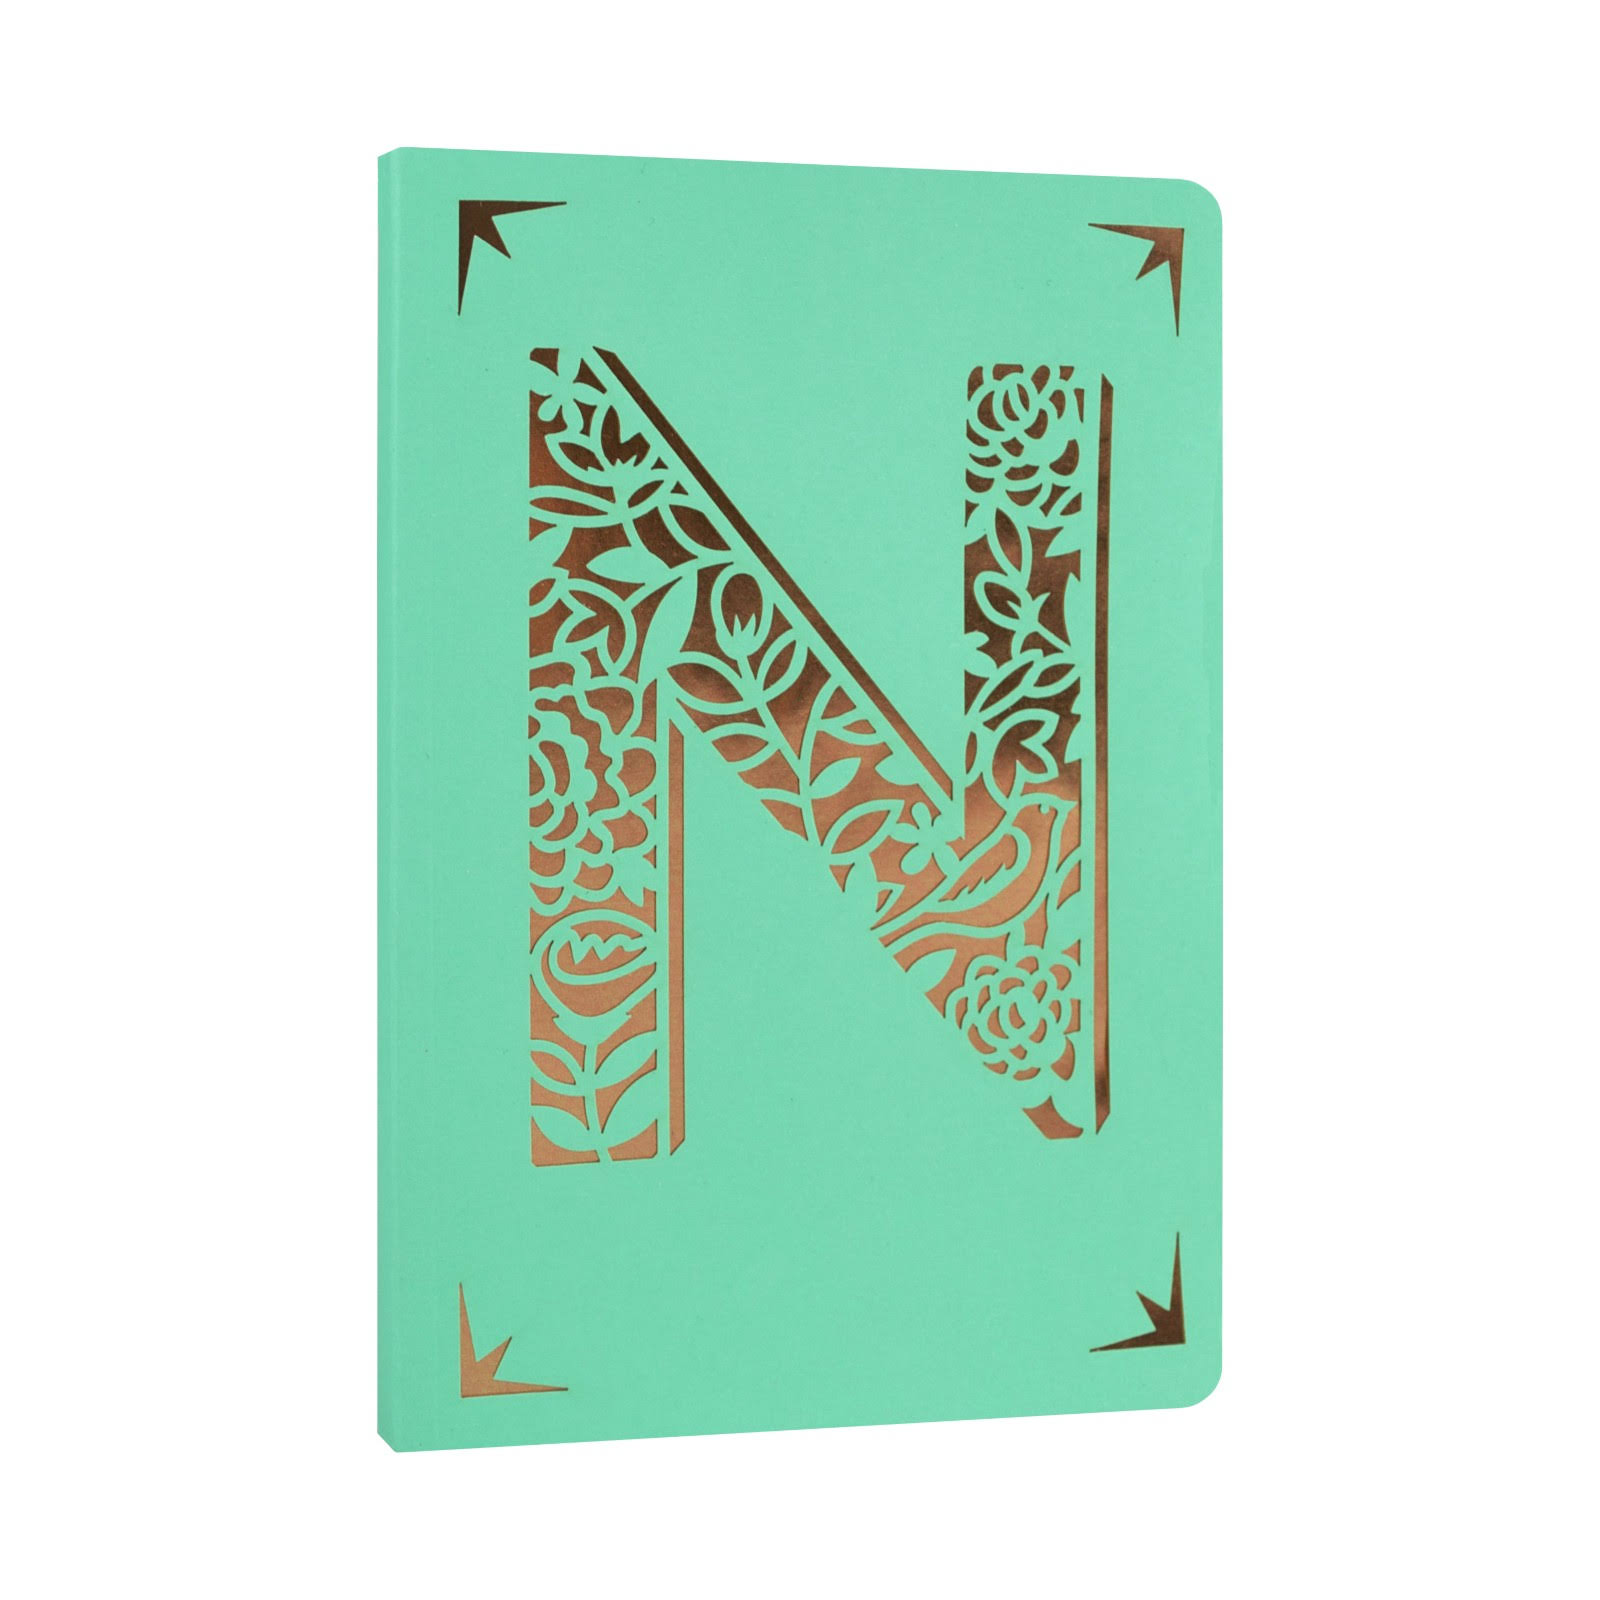 Available A-Z or & 124 Lined Pages Monogrammed A6 Foil Notebooks Portico 